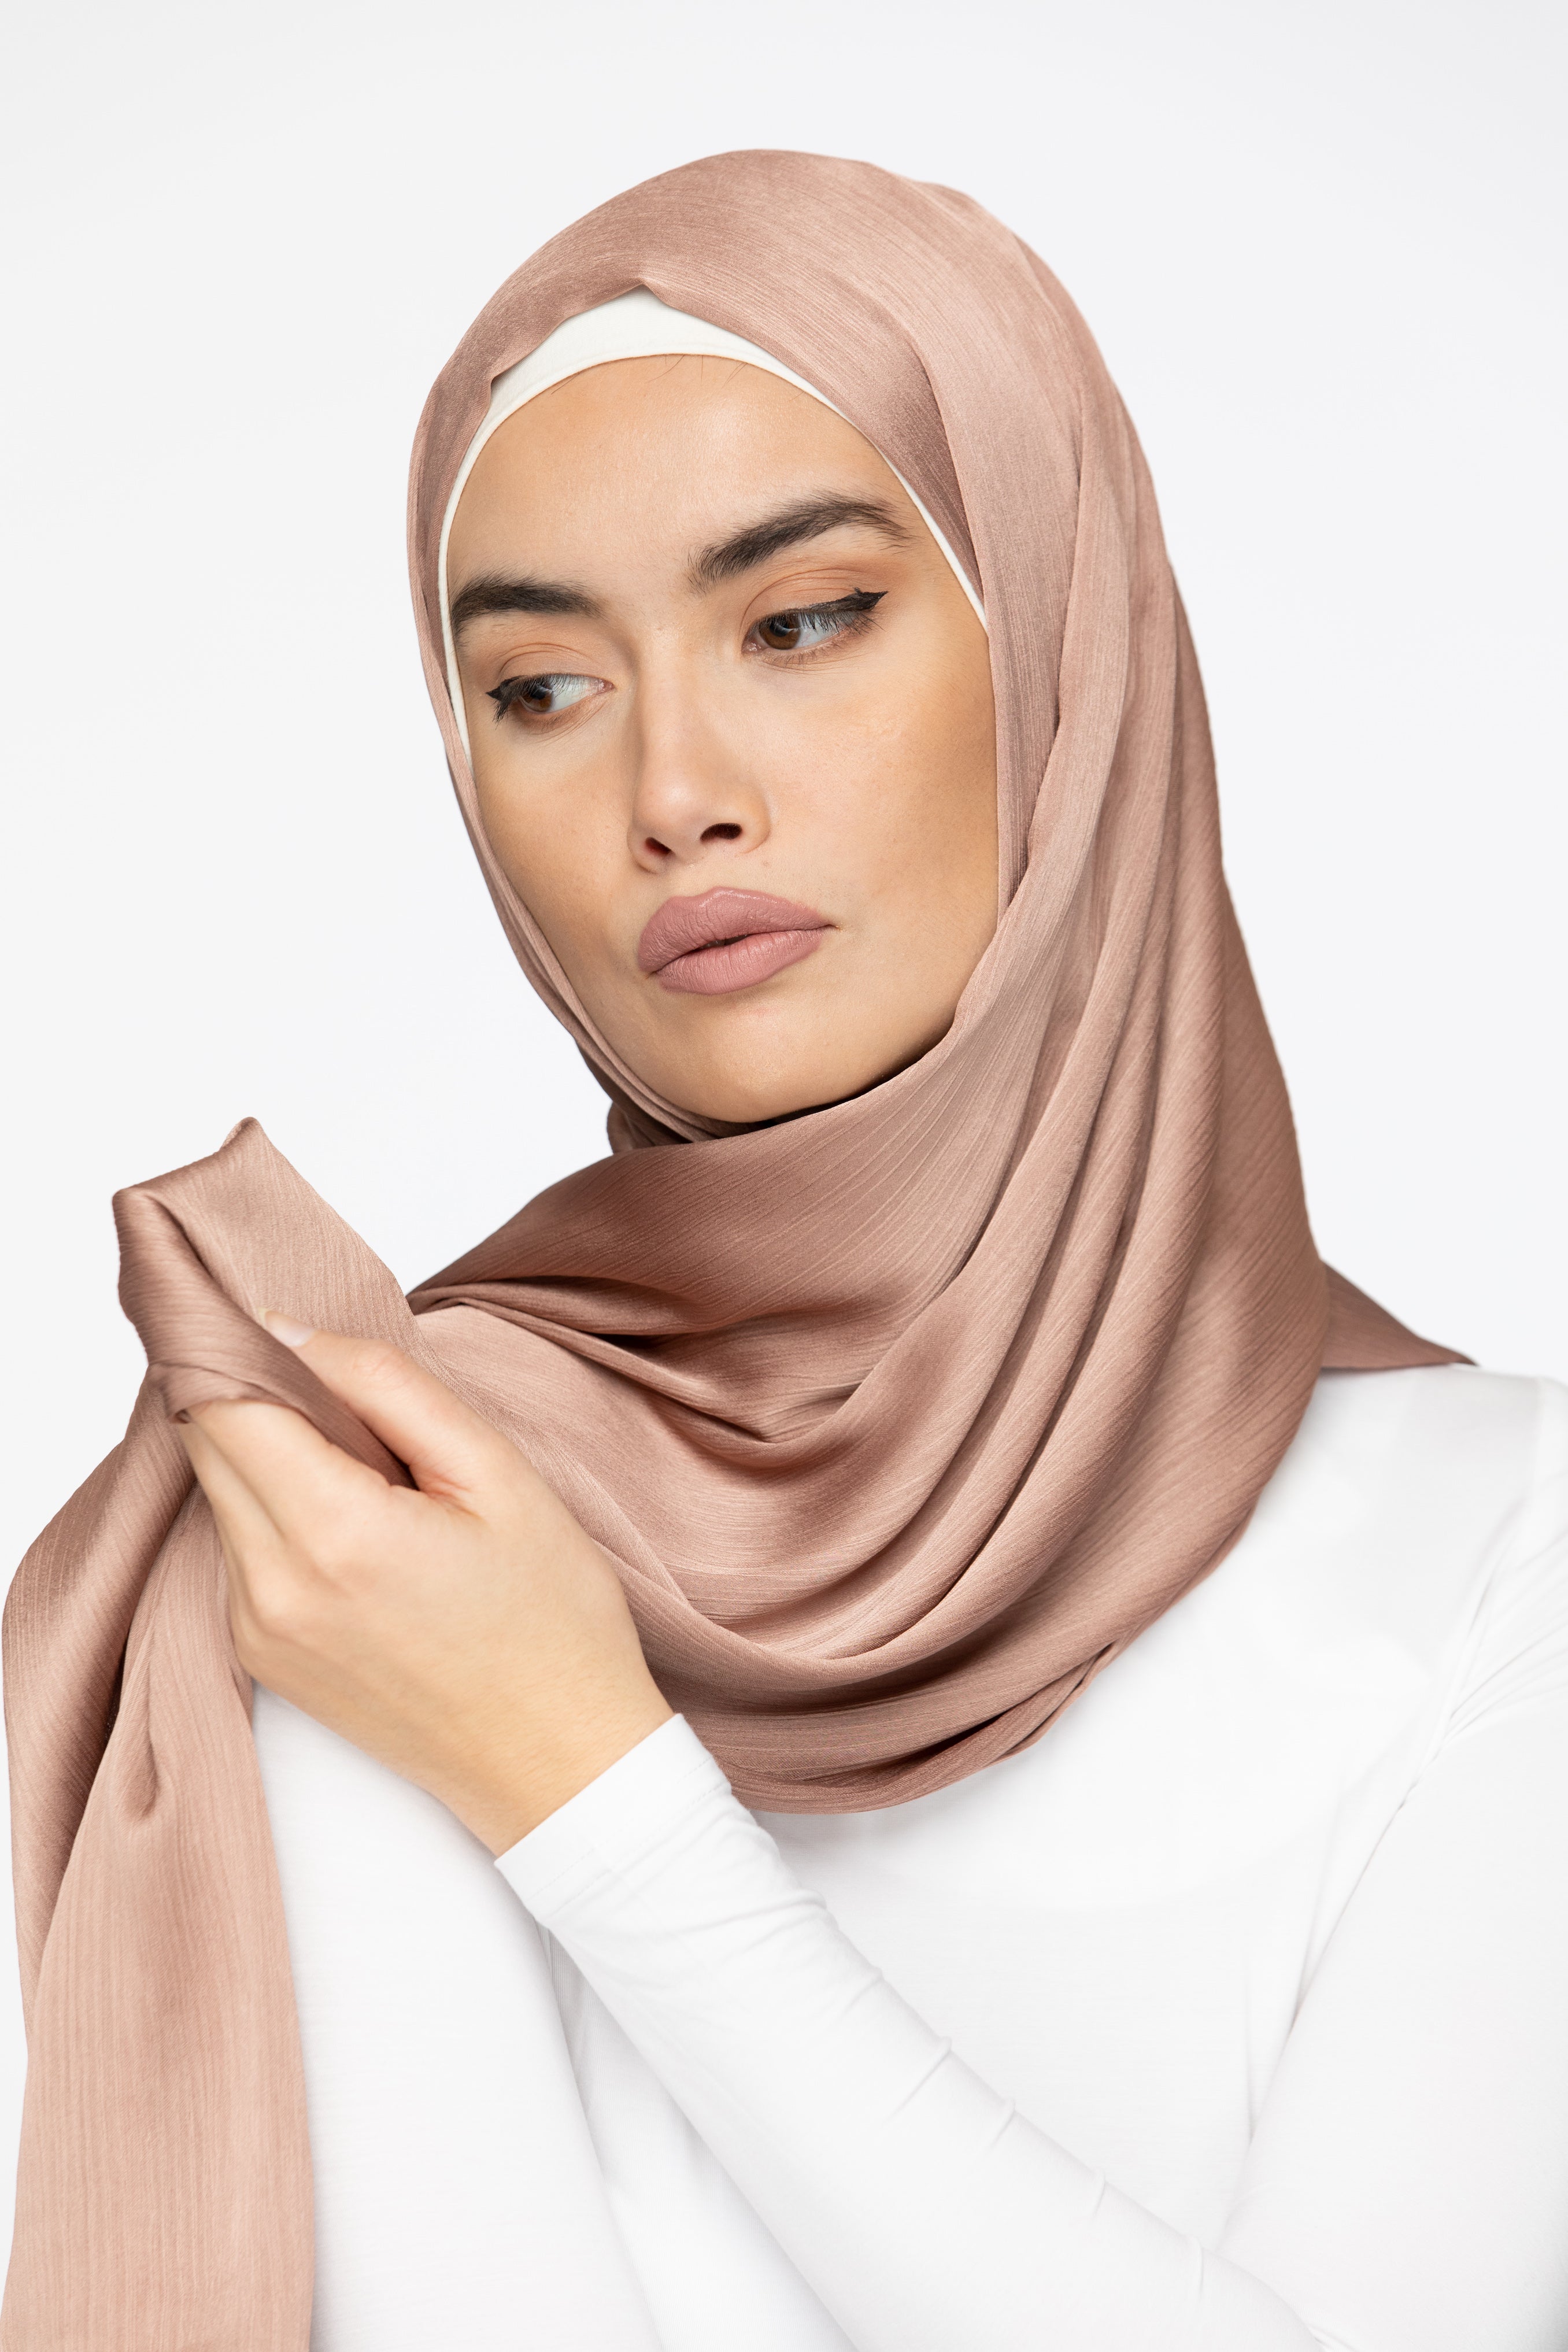 HH EXCLUSIVE // Sarah assembles the Hijab Stand. The new way to